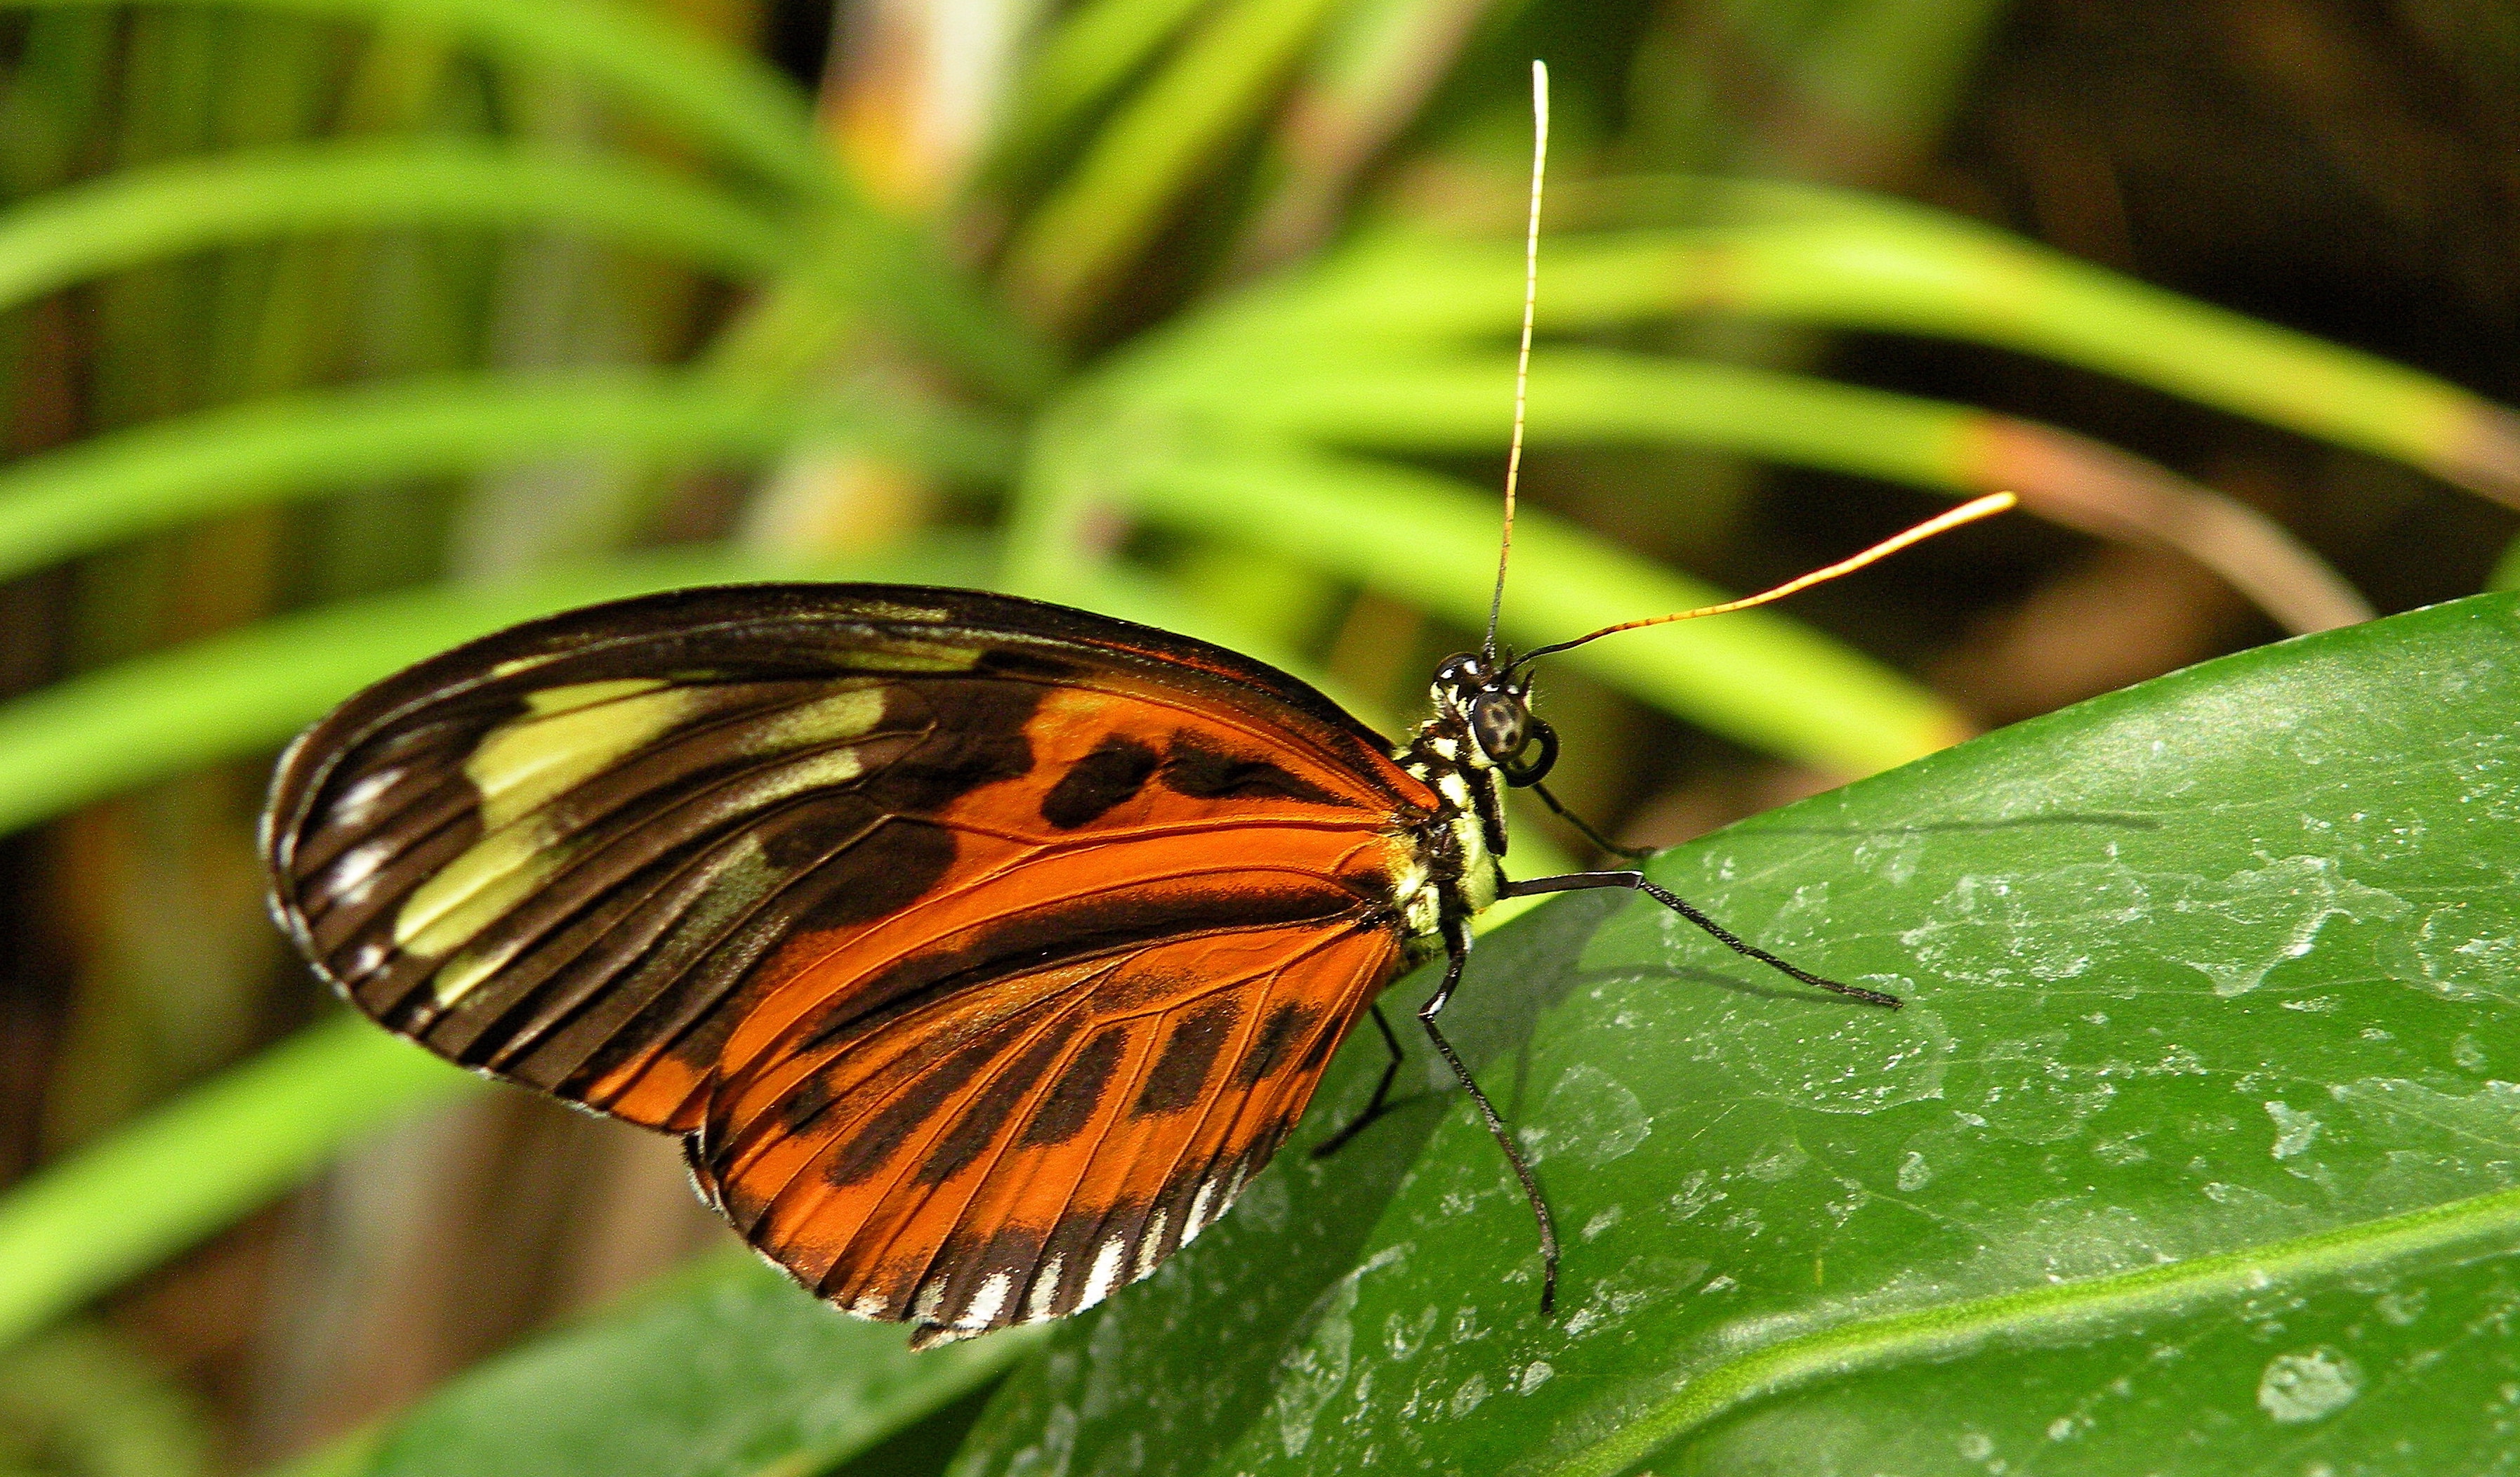 Image of a Heliconius butterfly